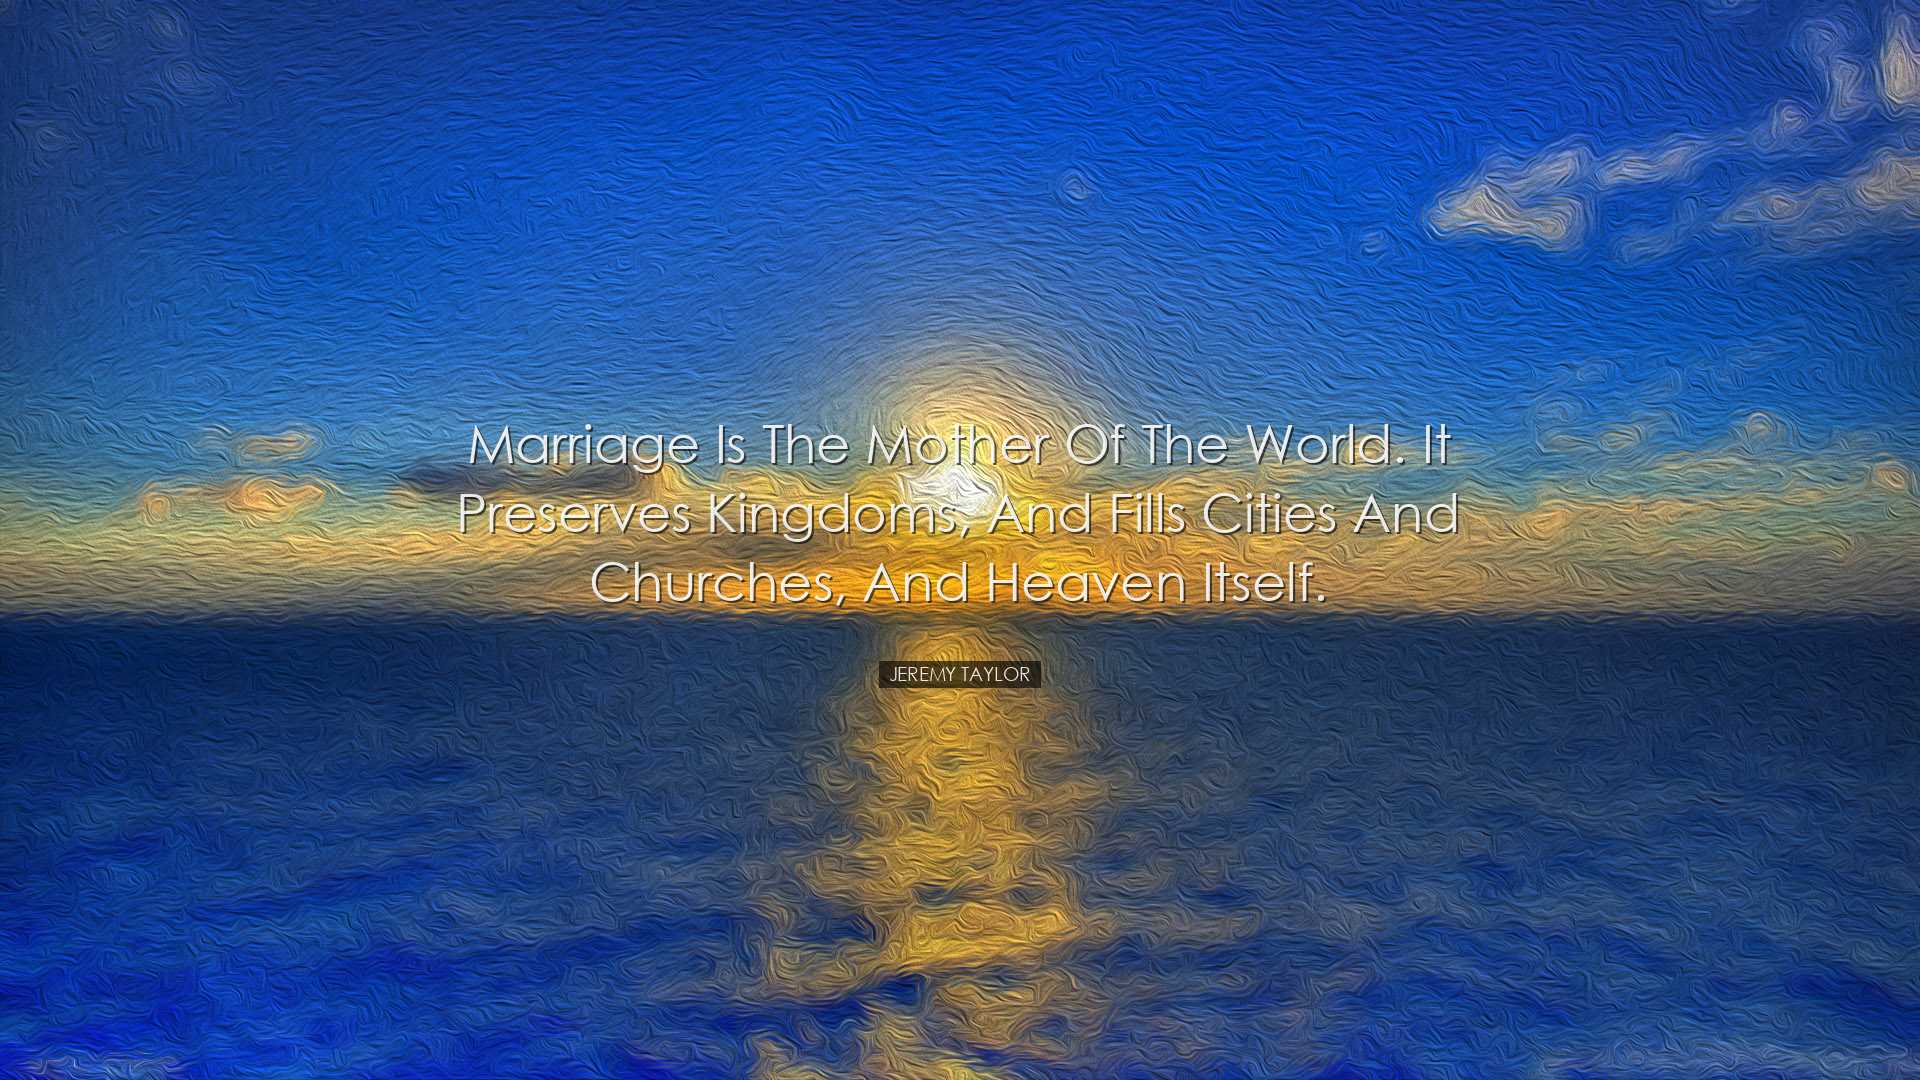 Marriage is the mother of the world. It preserves kingdoms, and fi